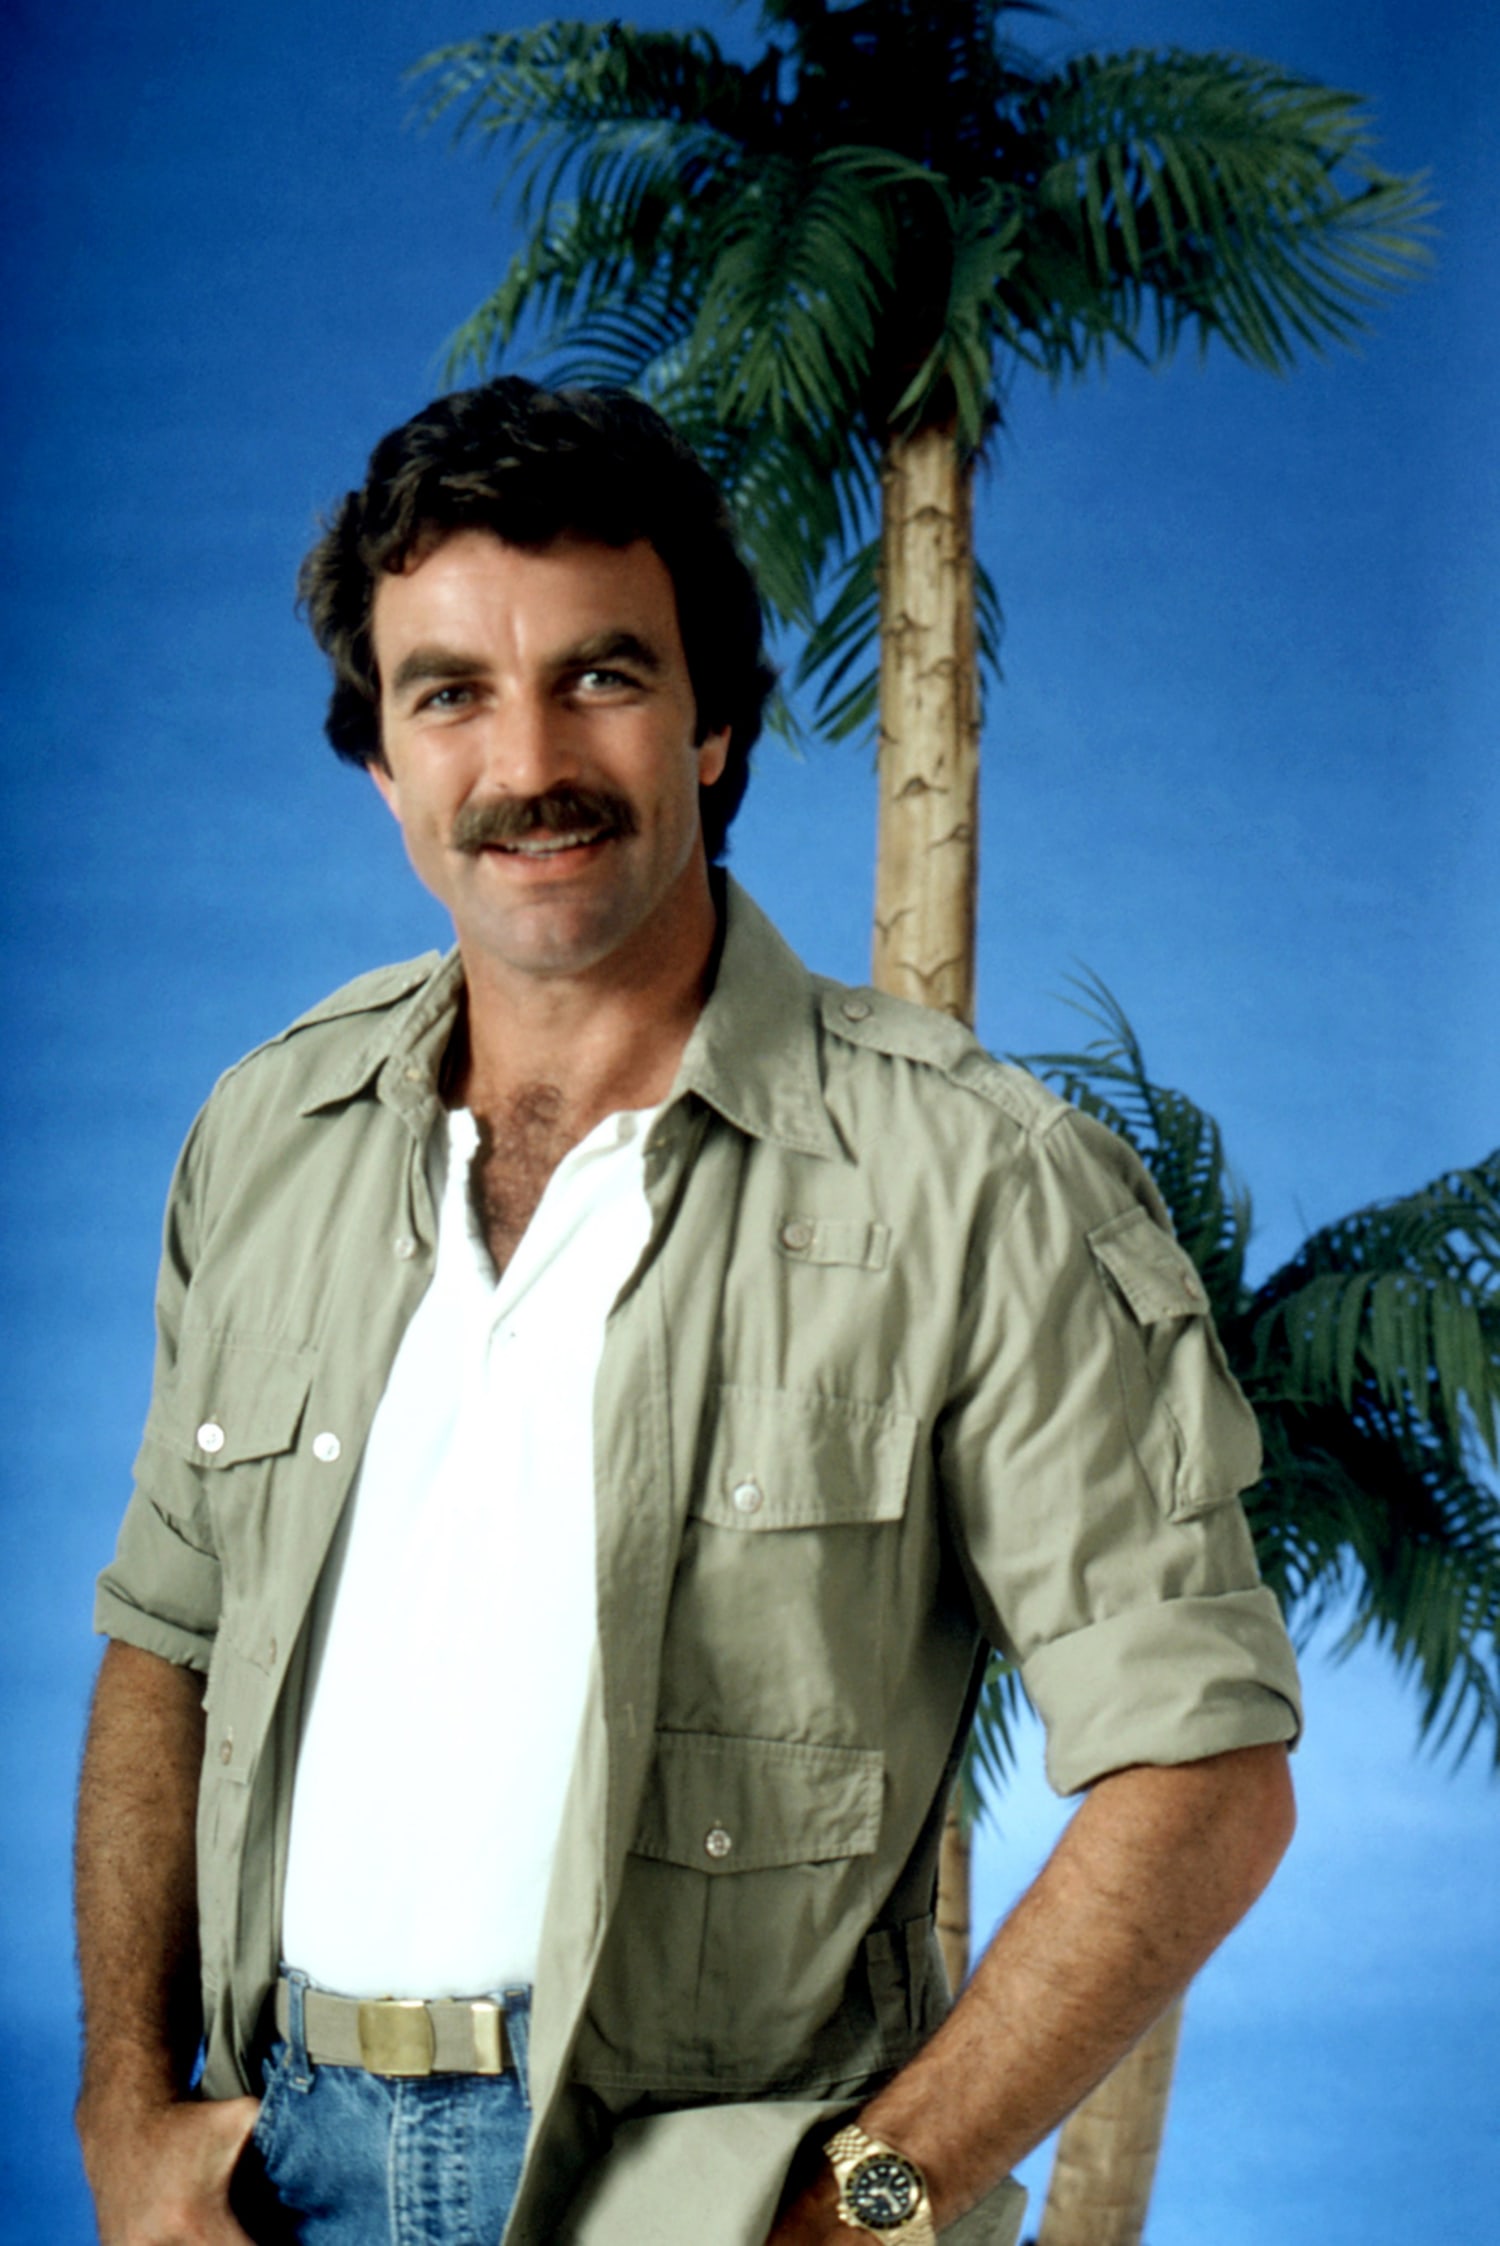 American Classics Magnum Pi Tom Selleck Red Costume Shirt and Hat - S